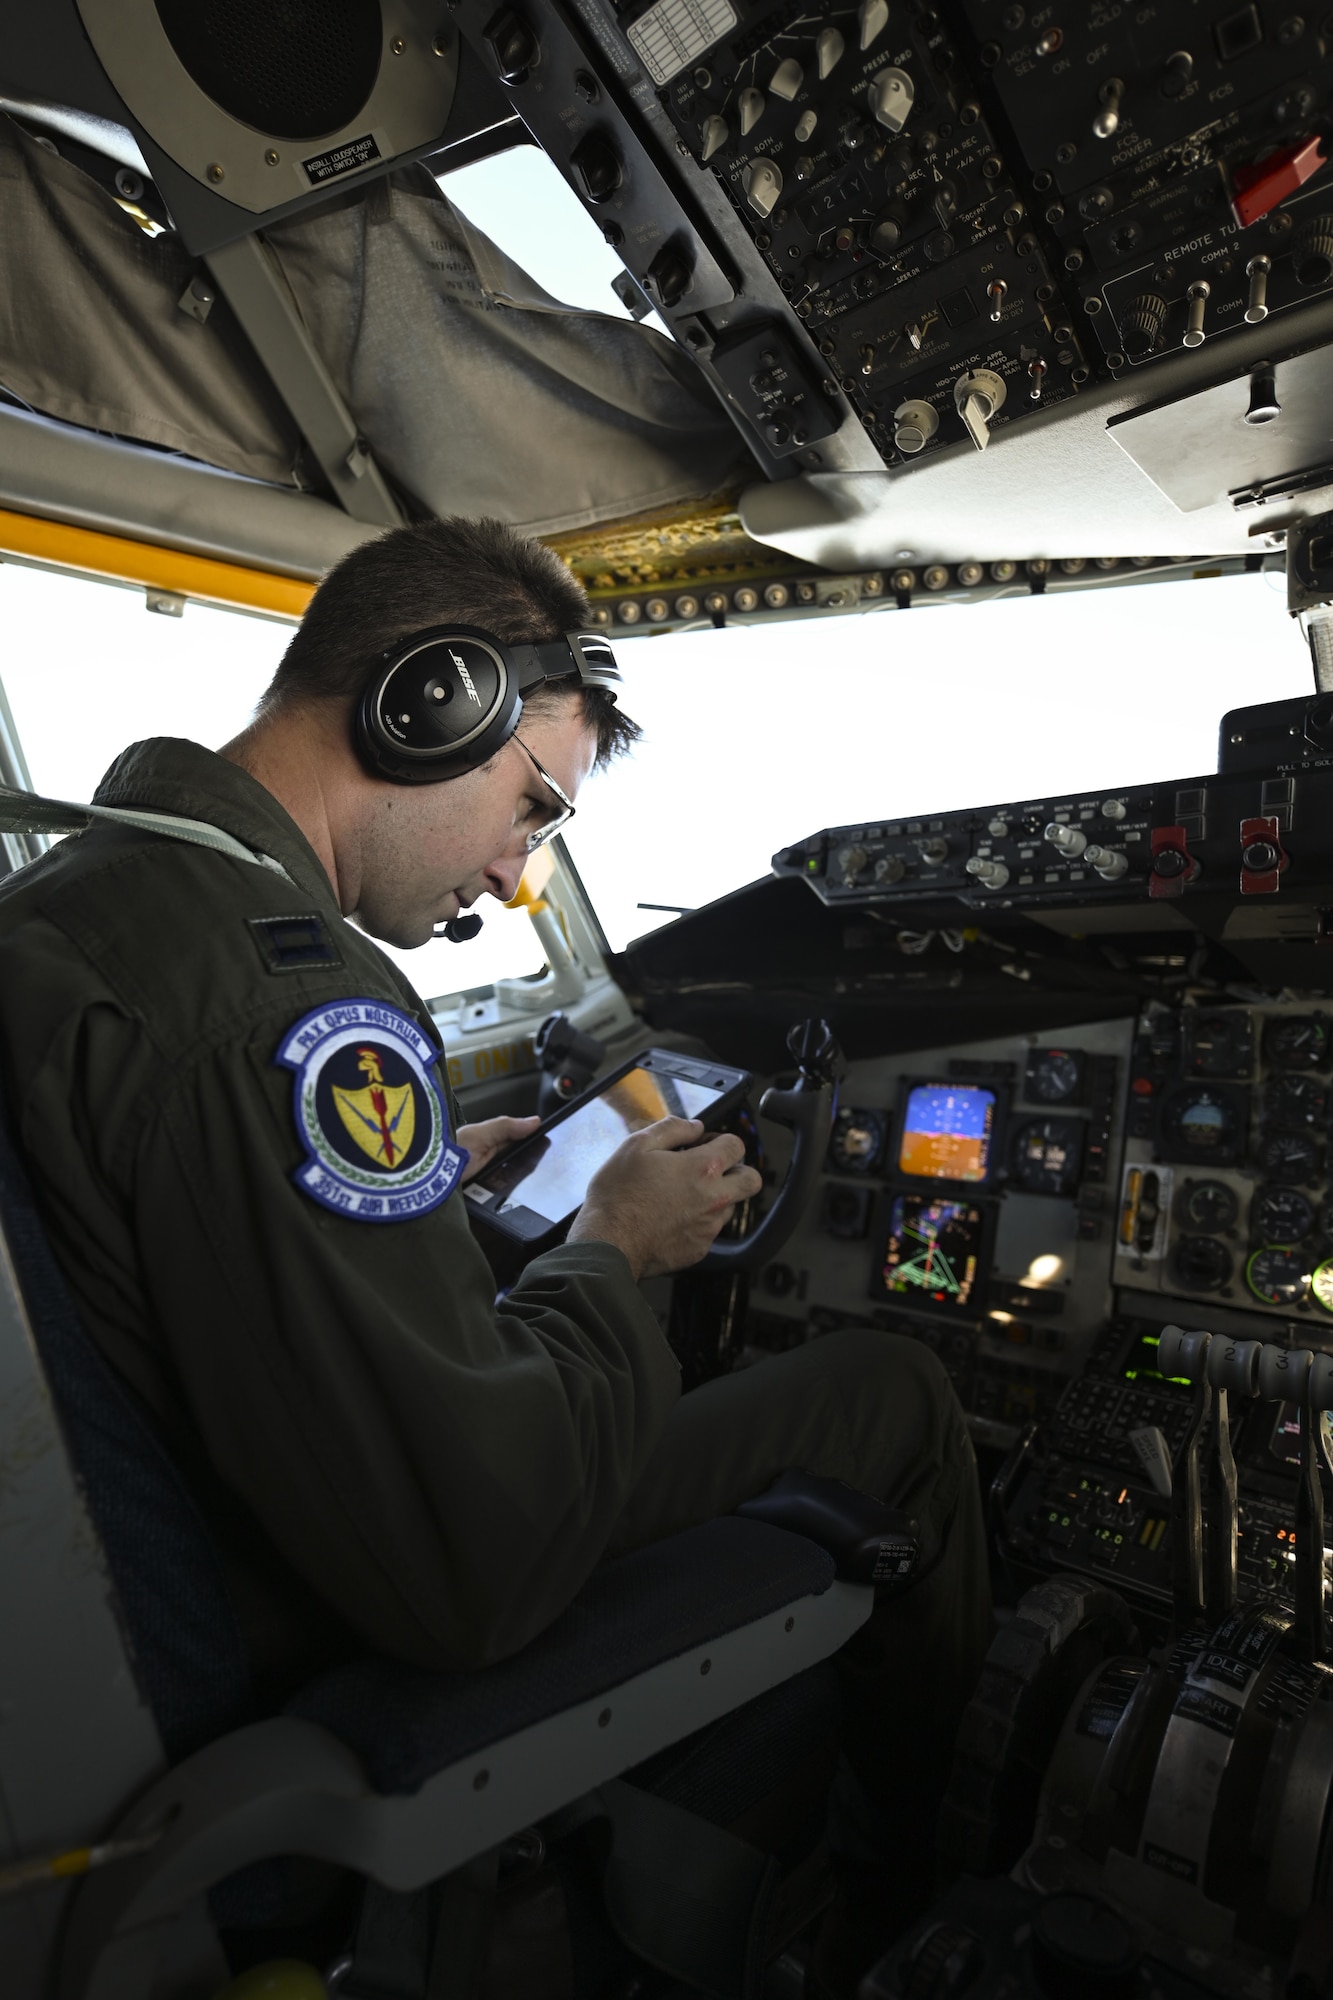 U.S. Air Force Capt. James Huff, 351st Air Refueling Squadron pilot, looks at his flight path during exercise High Life over the North Sea, Sept. 15, 2021. Agility, deterrence, and resiliency are essential to defense and operational capability in a contested environment. (U.S. Air Force photo by Senior Airman Joseph Barron)